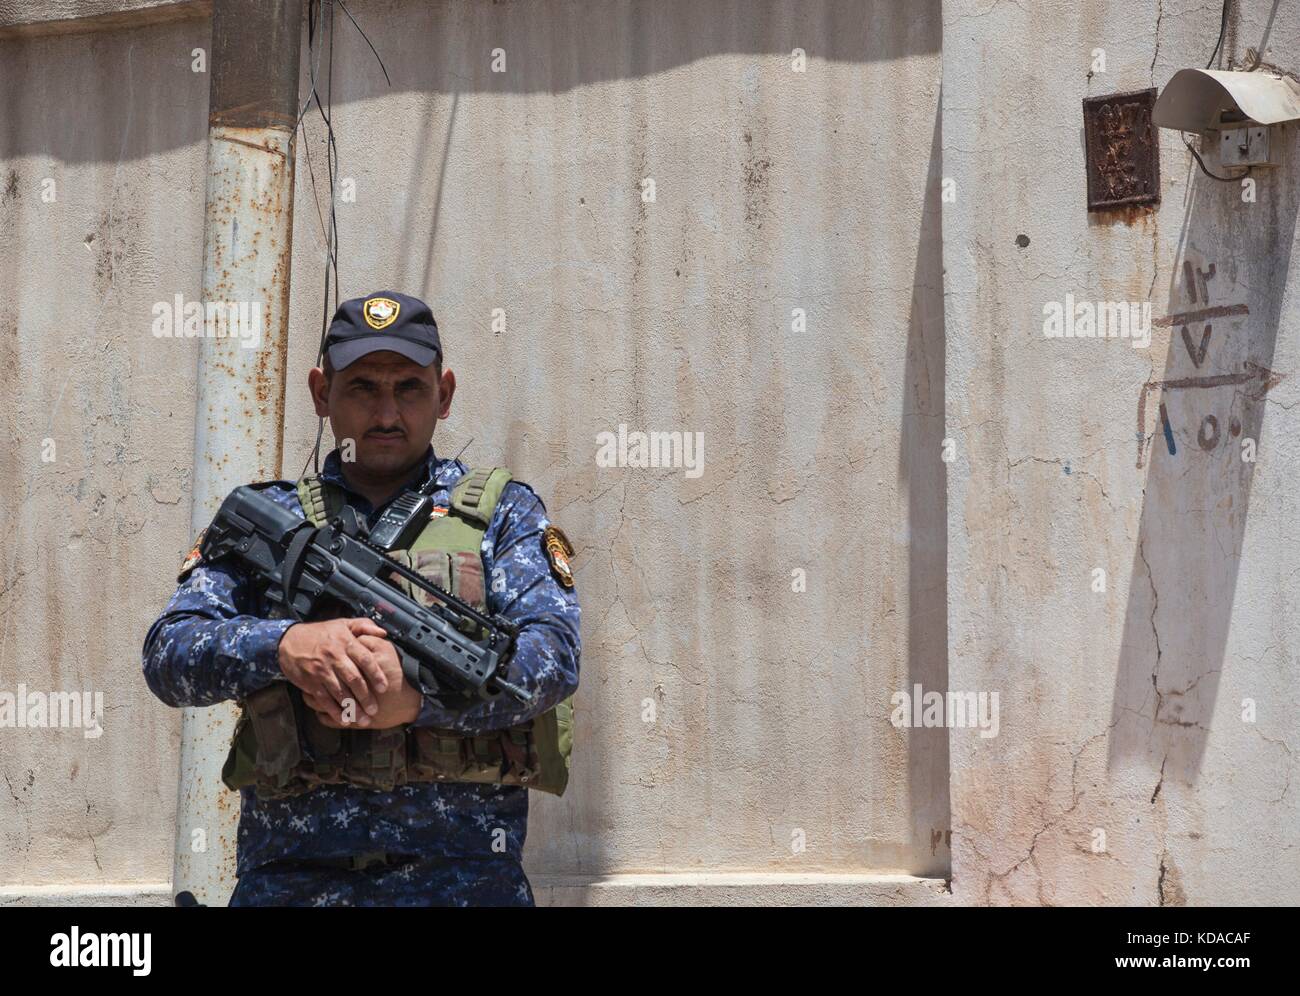 An Iraqi Federal Police officer guards a patrol base June 29, 2017 in Mosul, Iraq. There has been a combined effort between U.S. and Iraqi forces in the area to defeat ISIS extremists. Stock Photo